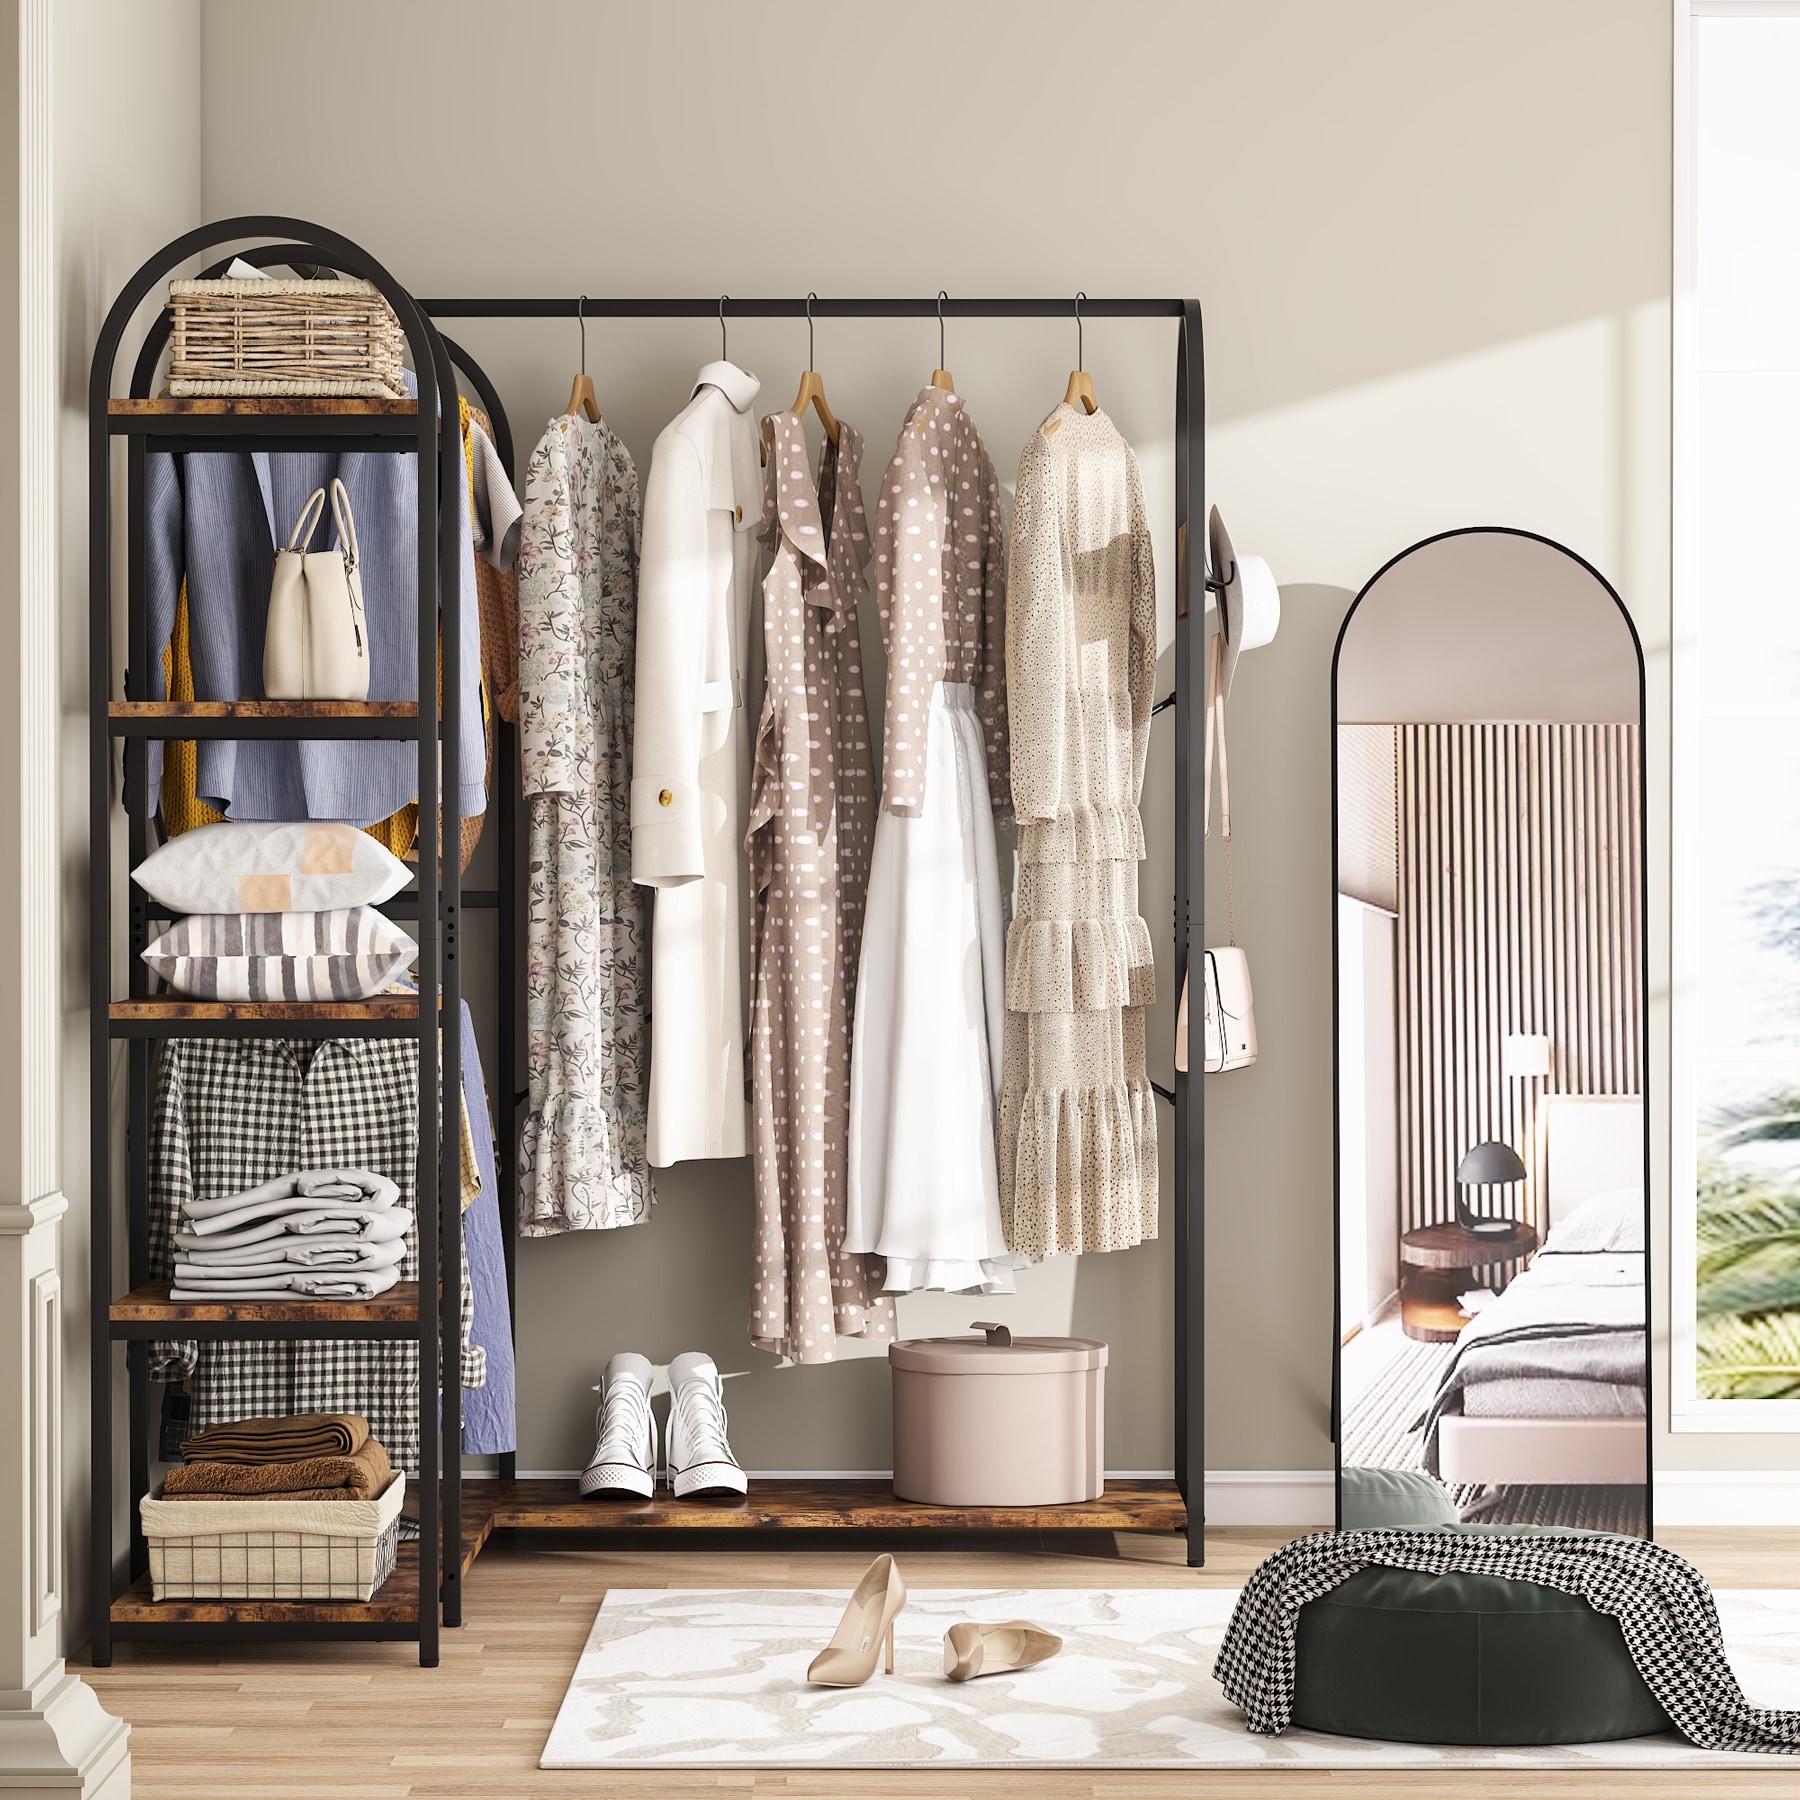 https://ak1.ostkcdn.com/images/products/is/images/direct/70f7b77501e8db8fec847871f691841d2728673c/Heavy-Duty-L-Shape-Clothes-Rack%2CFreestanding-Corner-Closet-Organizer%2CLarge-Garment-Rack-with-Storage-Shelves-and-Hanging-Rods.jpg